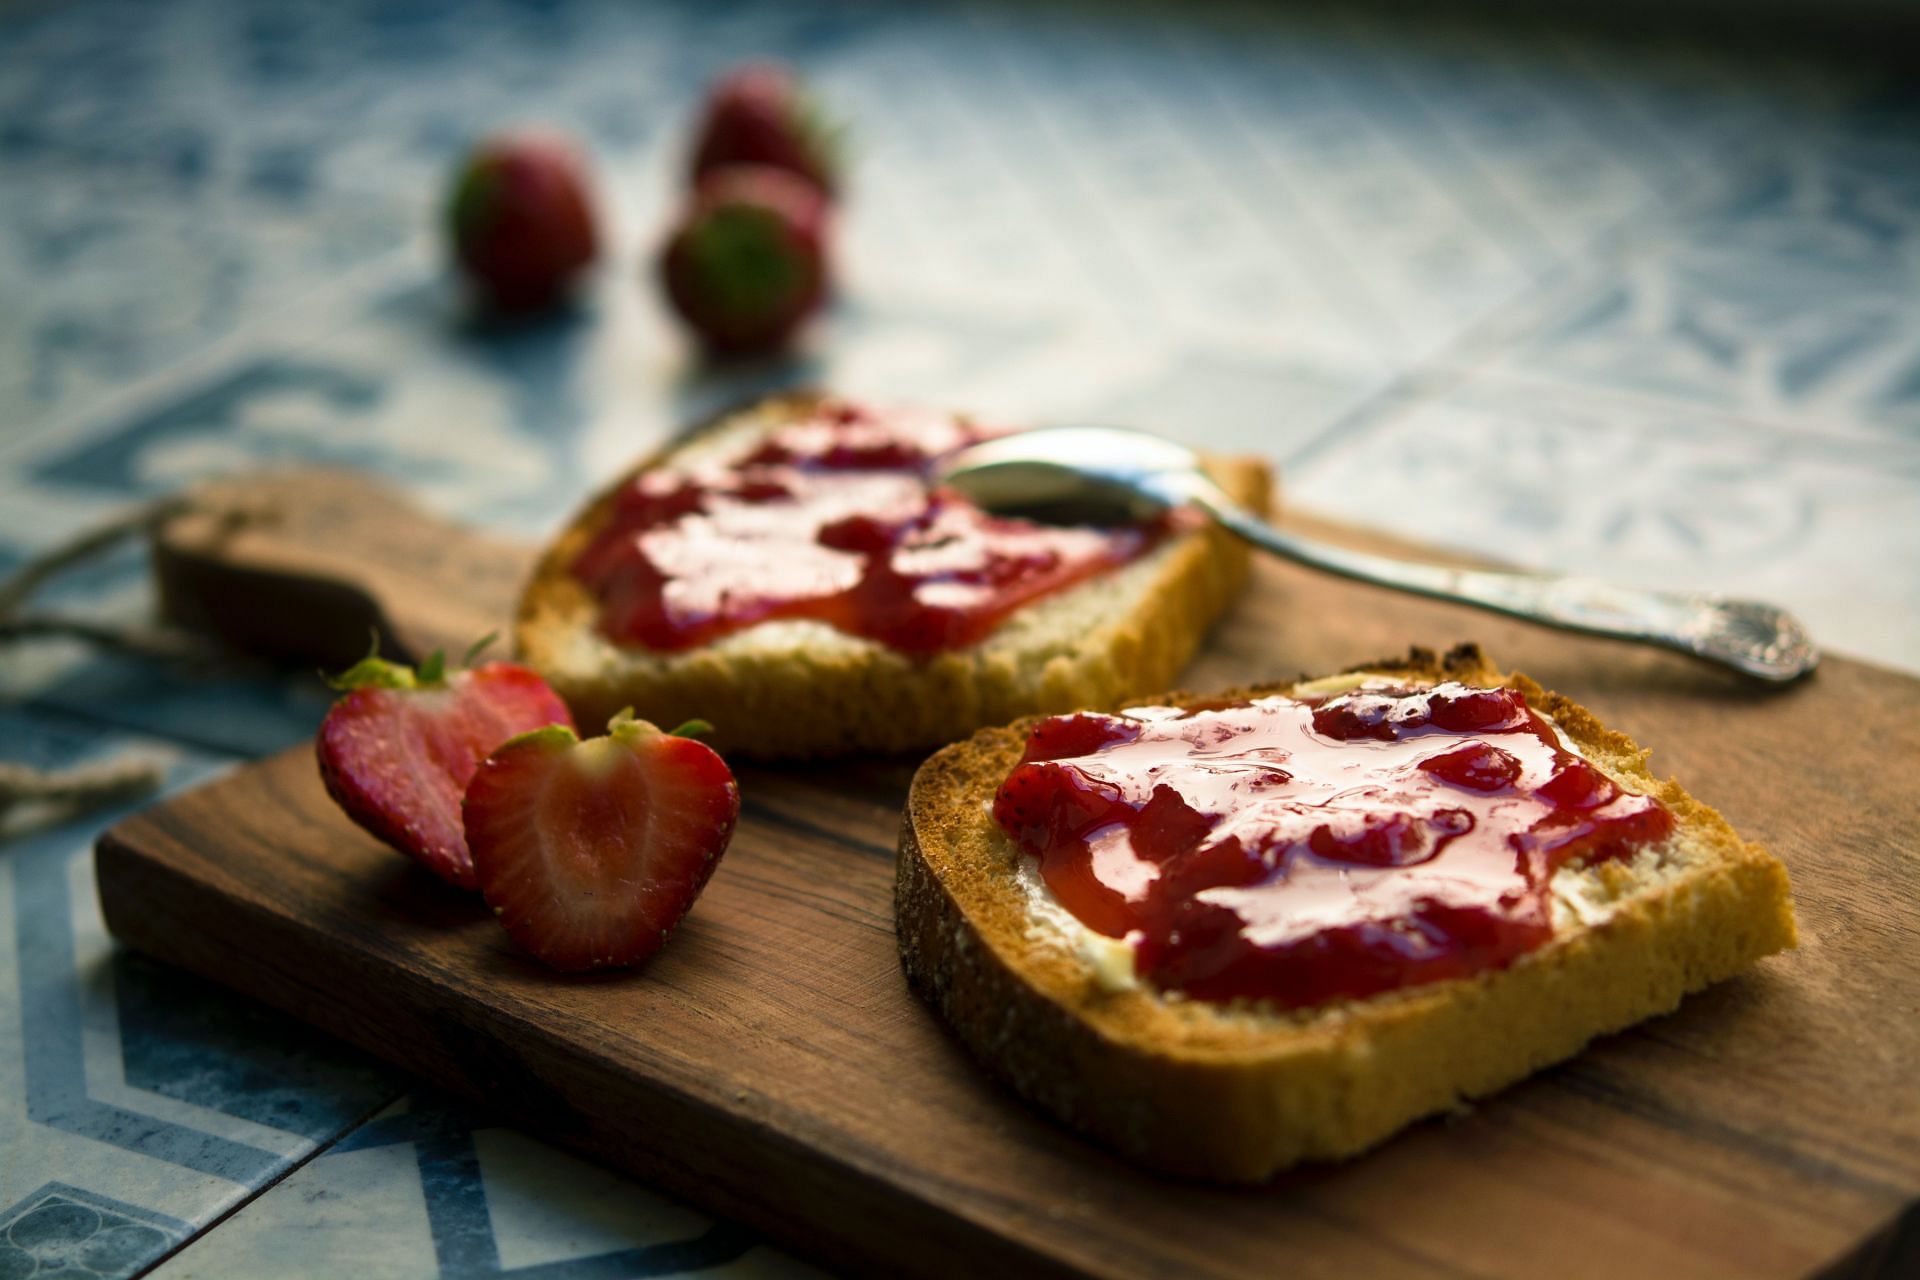 Is peanut butter and jelly healthy? Yes, in moderation. (Image via Unsplash/Jonathan Pielmayer)